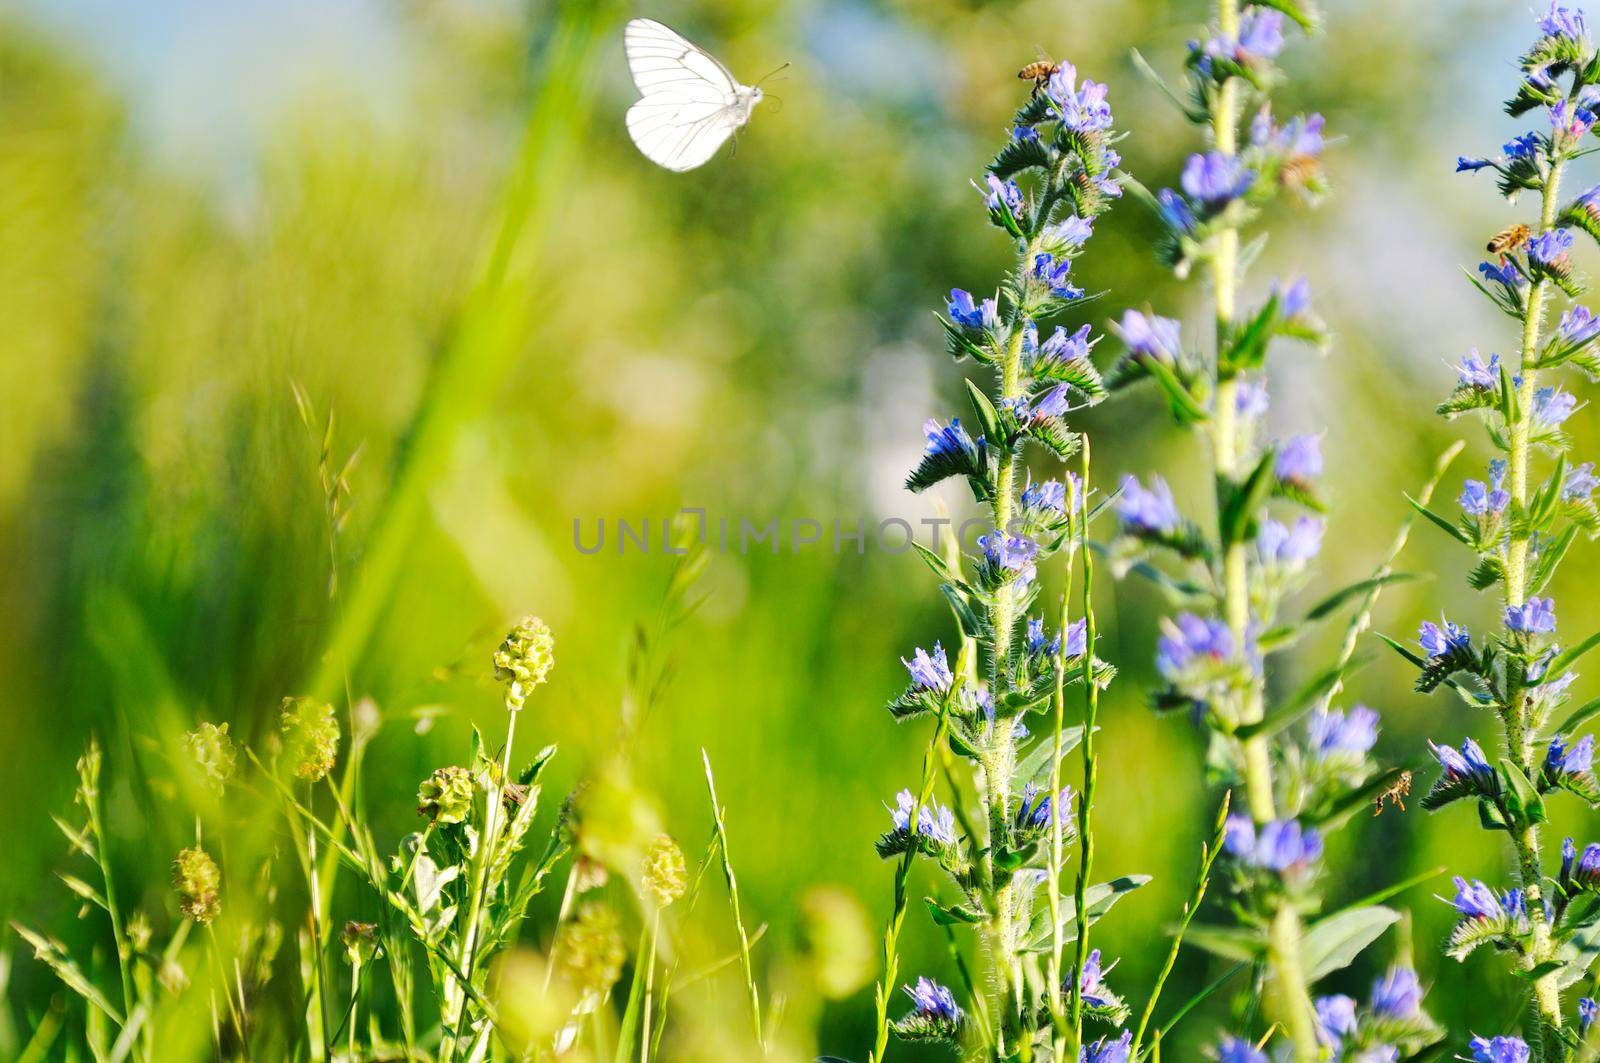 white buterfly at sunny day fly over plants and flower in meadow